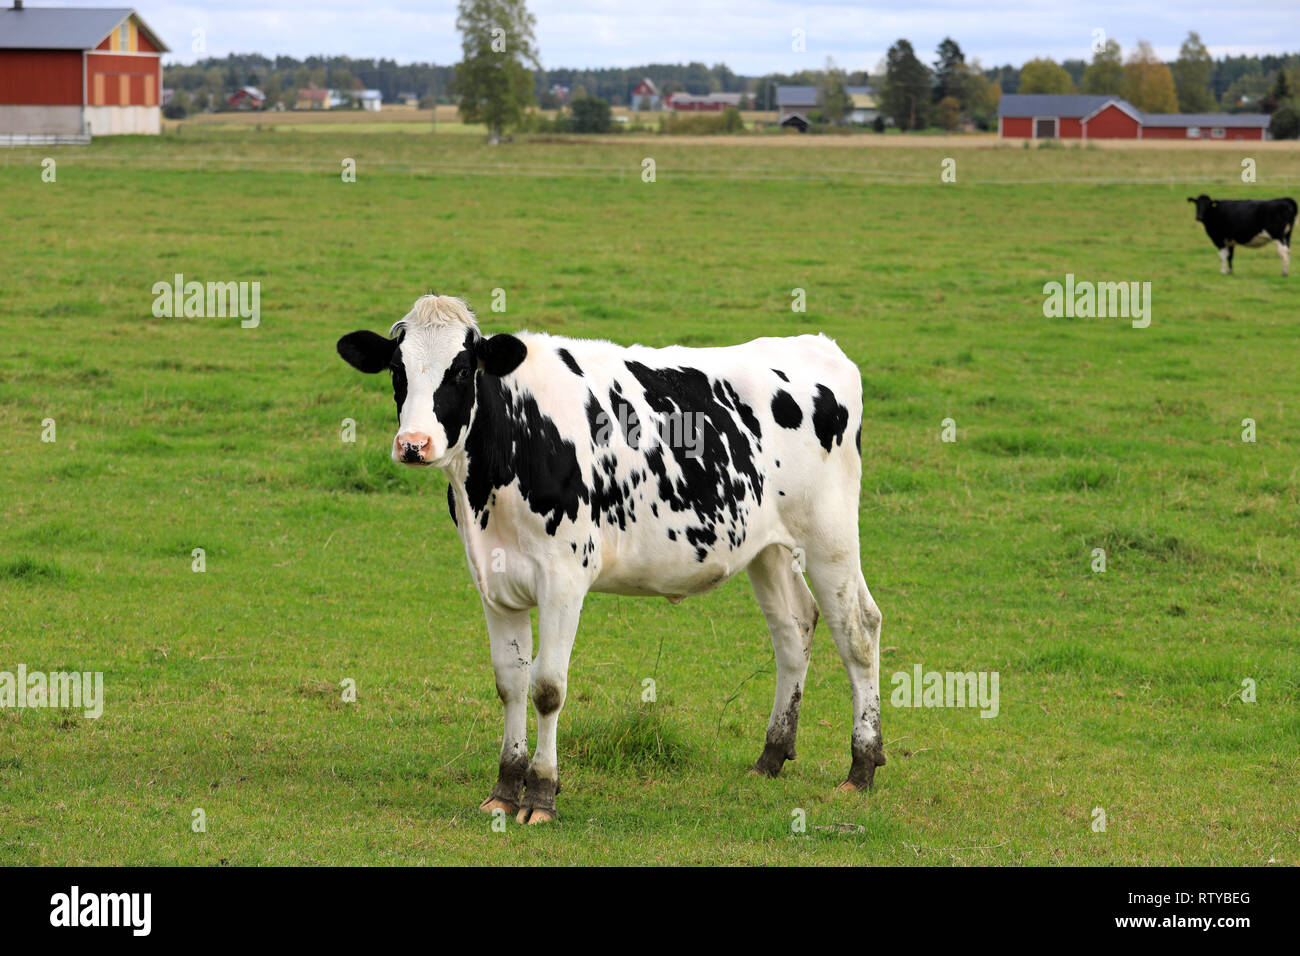 Young, curious Holstein-Friesian cow standing on green grassy farmland on a day of summer. Stock Photo